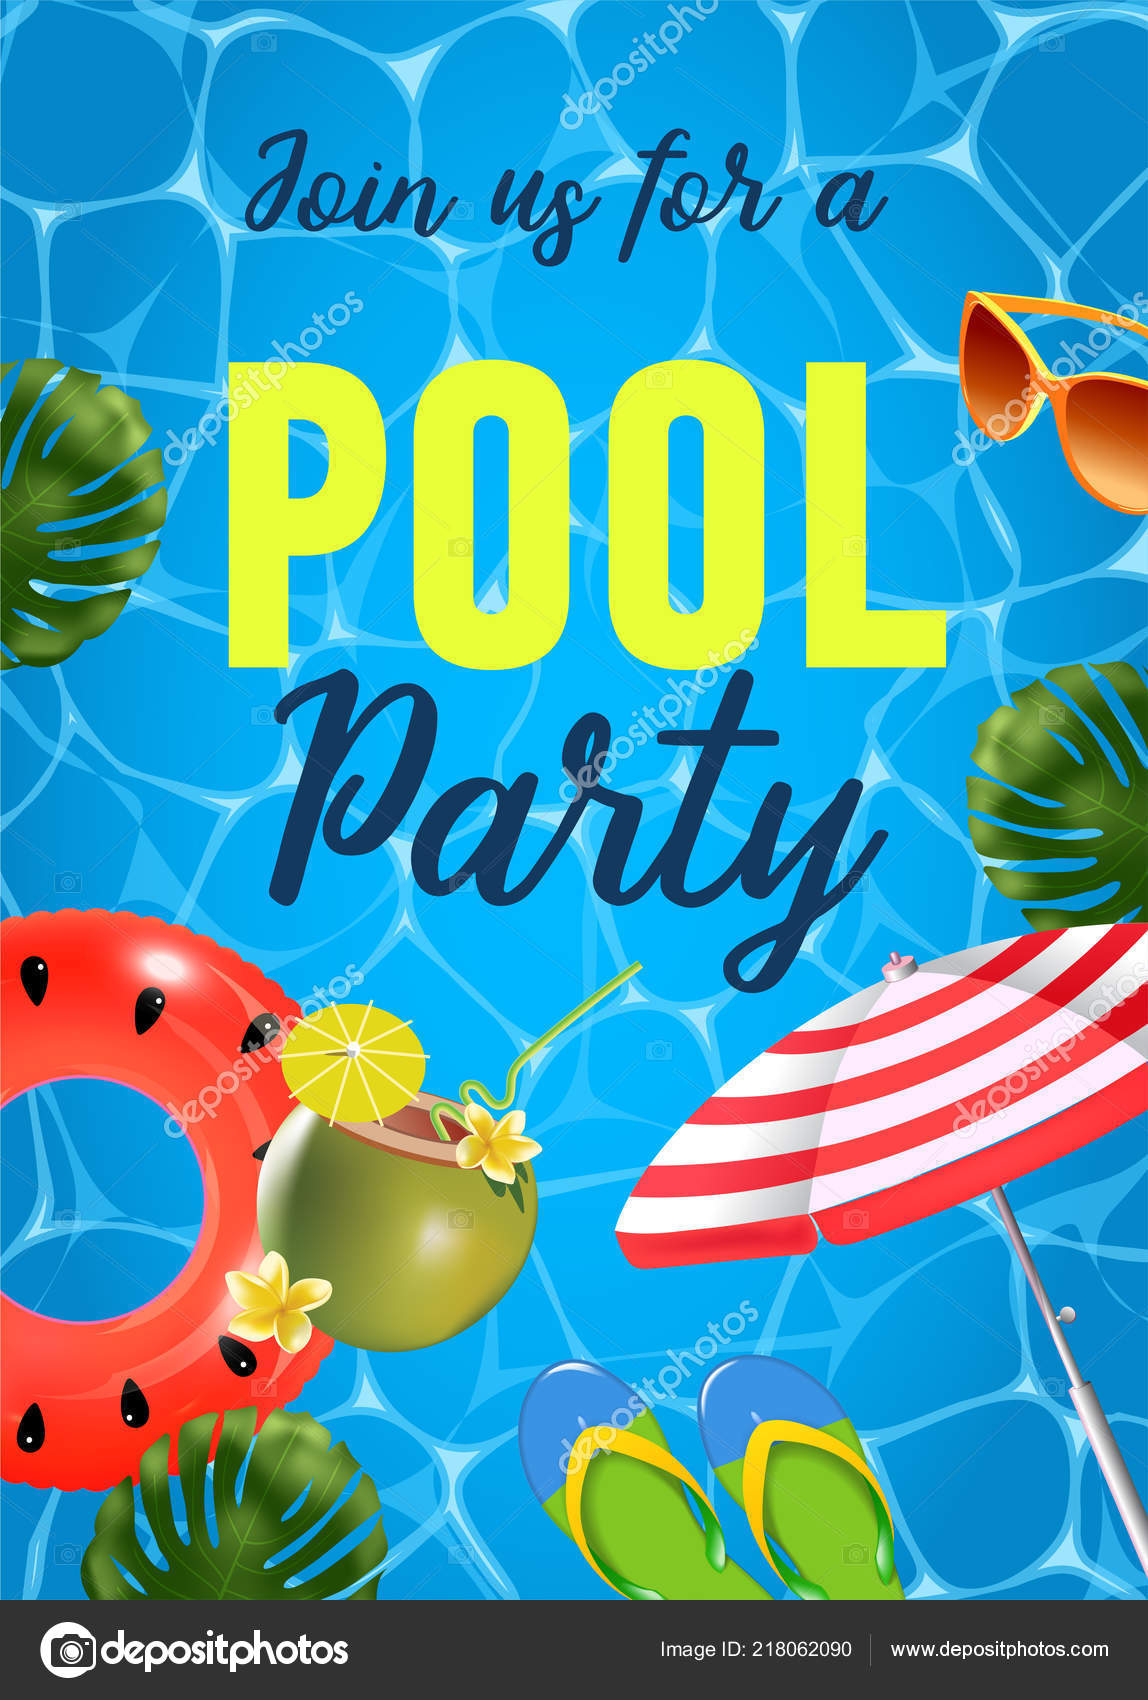 Pool Party Invitation Vector Illustration With Water Swimming Pool Vector  Background Stock Illustration - Download Image Now - iStock